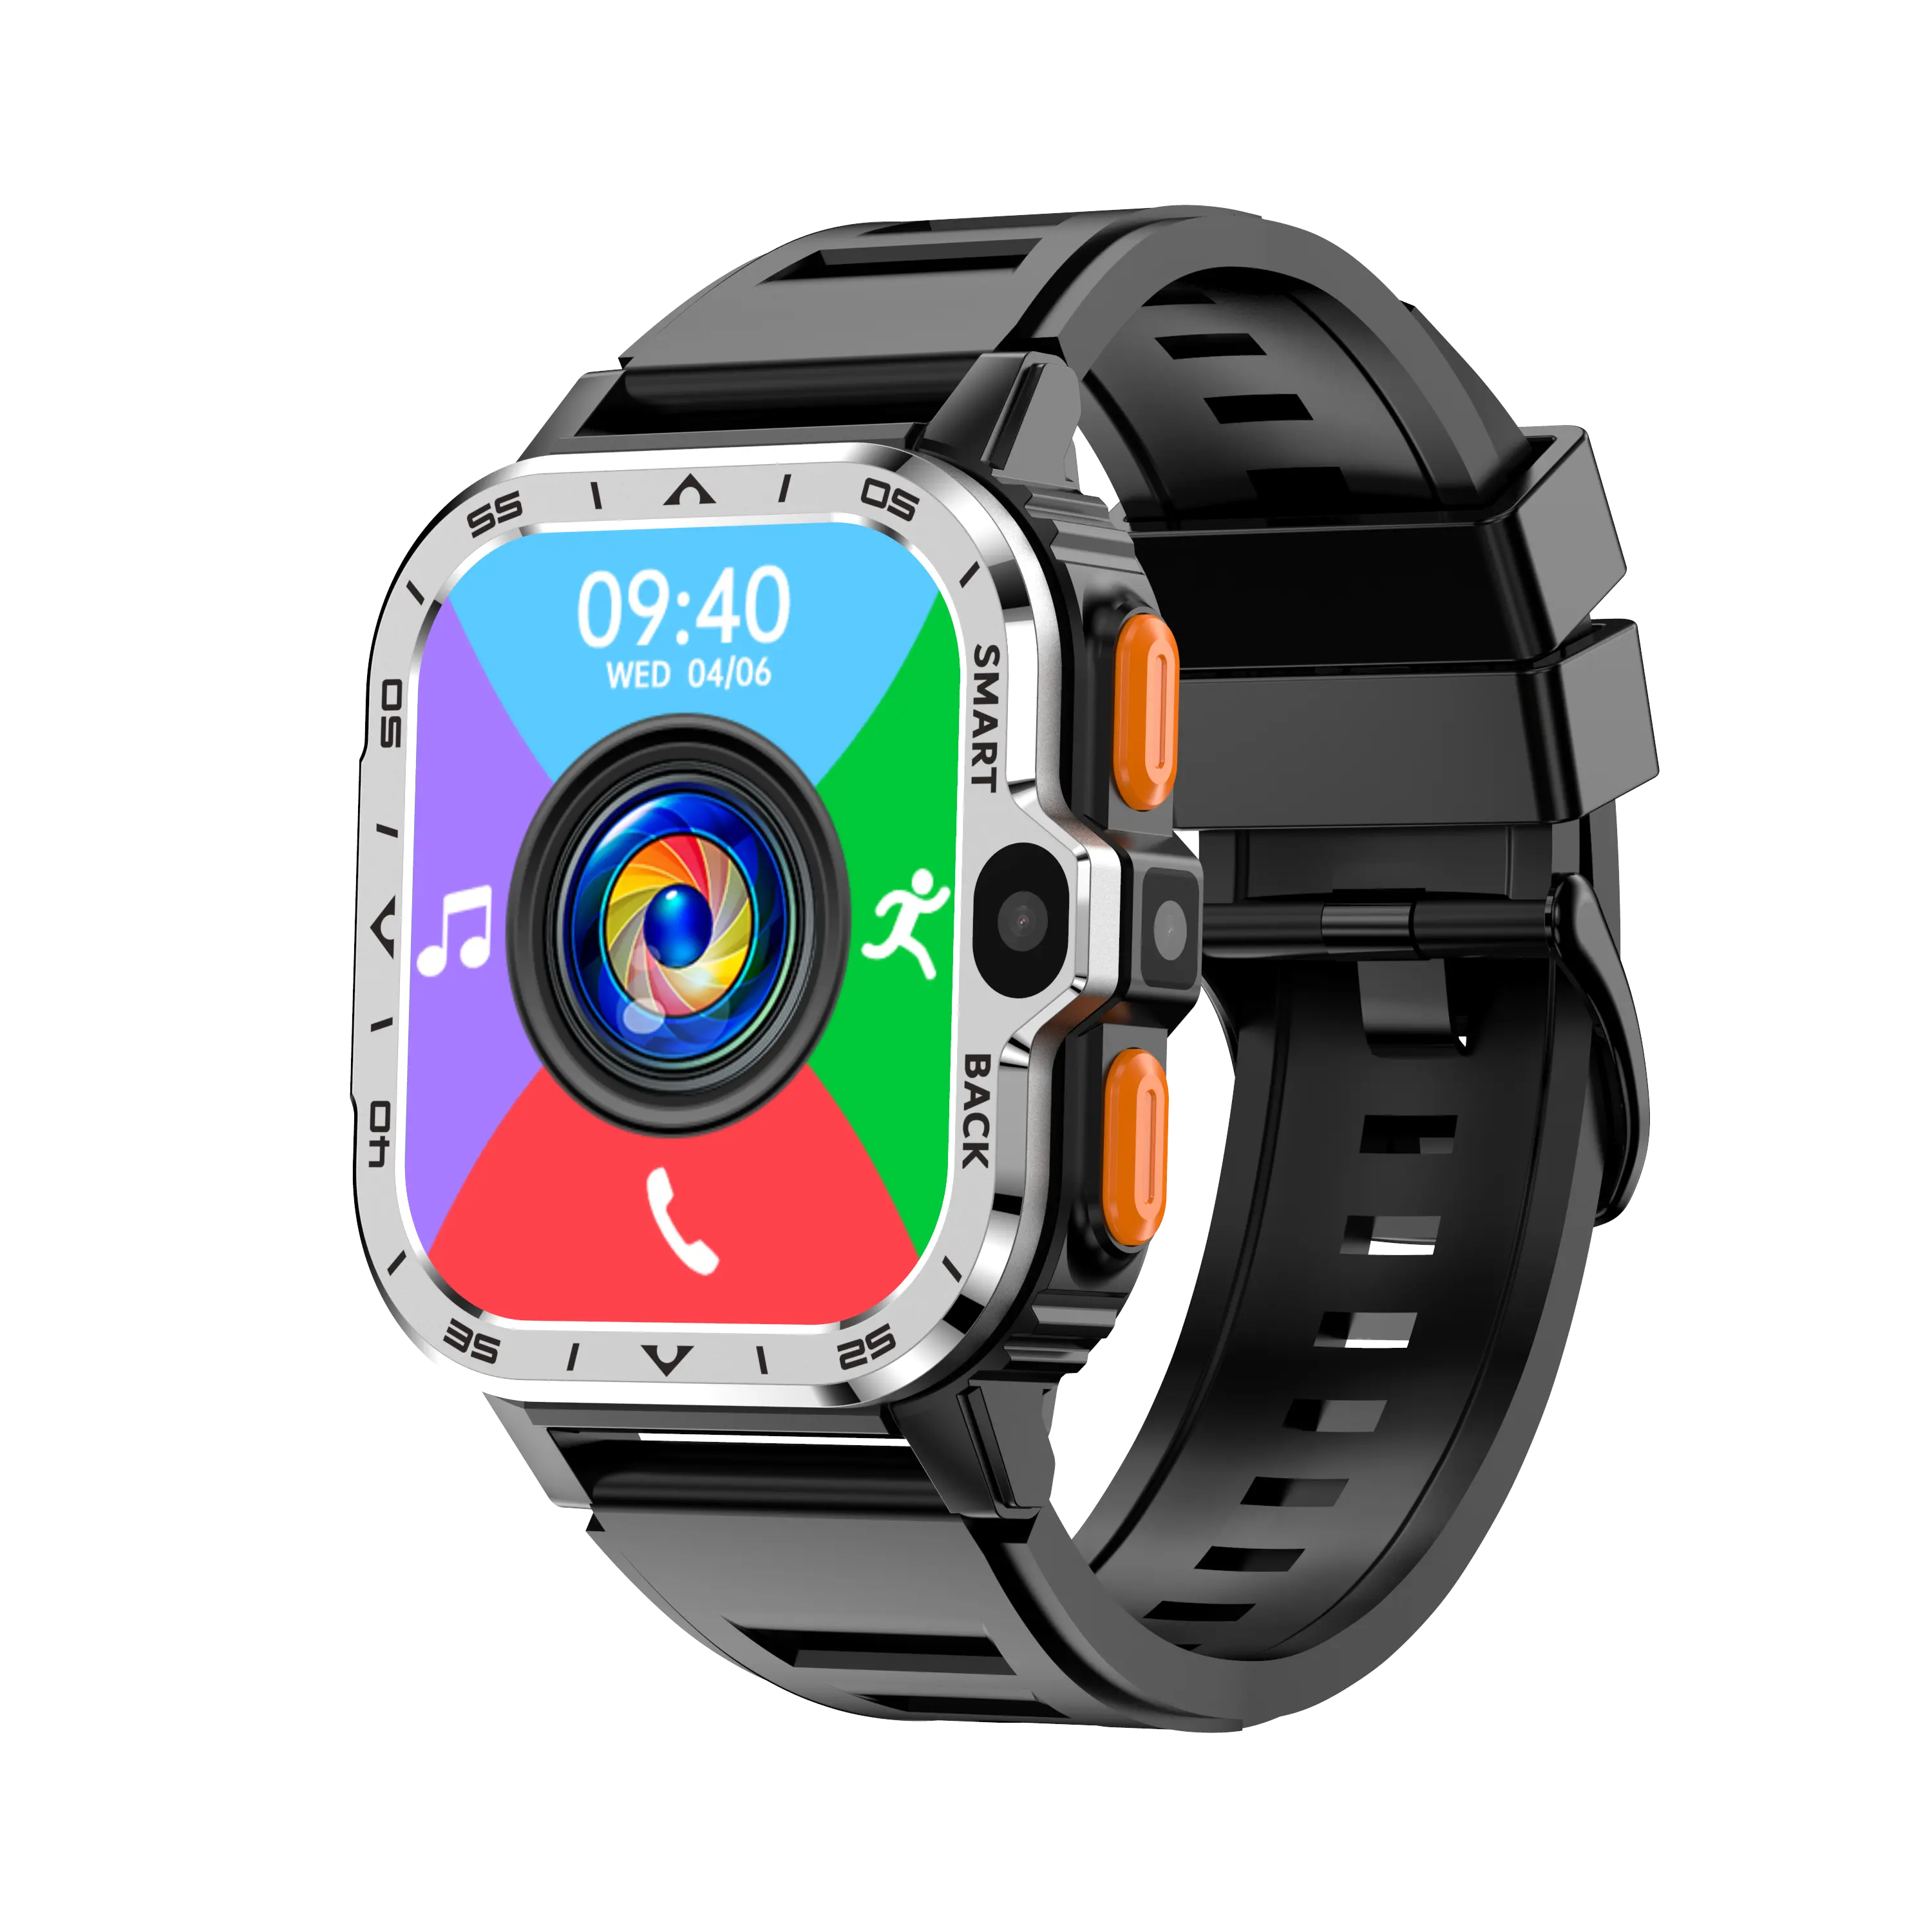 Smochm Android 2G+16G HD Rear Camera Smart Watch GPS APP Download 4G Network 700mAh Battery Play Store Google Push Message